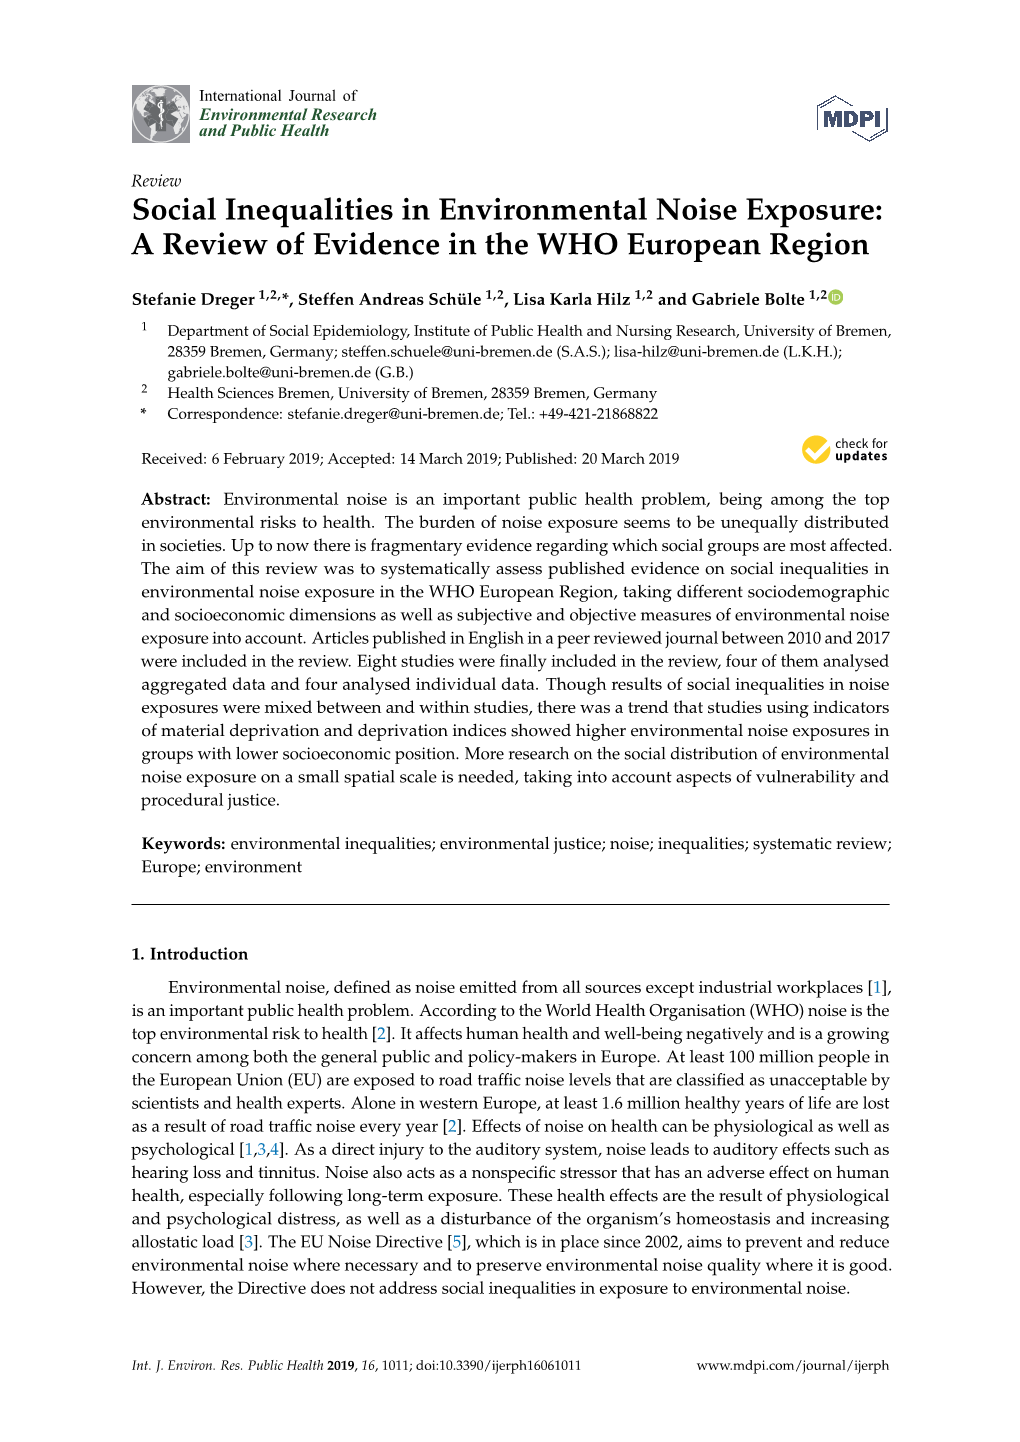 Social Inequalities in Environmental Noise Exposure: a Review of Evidence in the WHO European Region